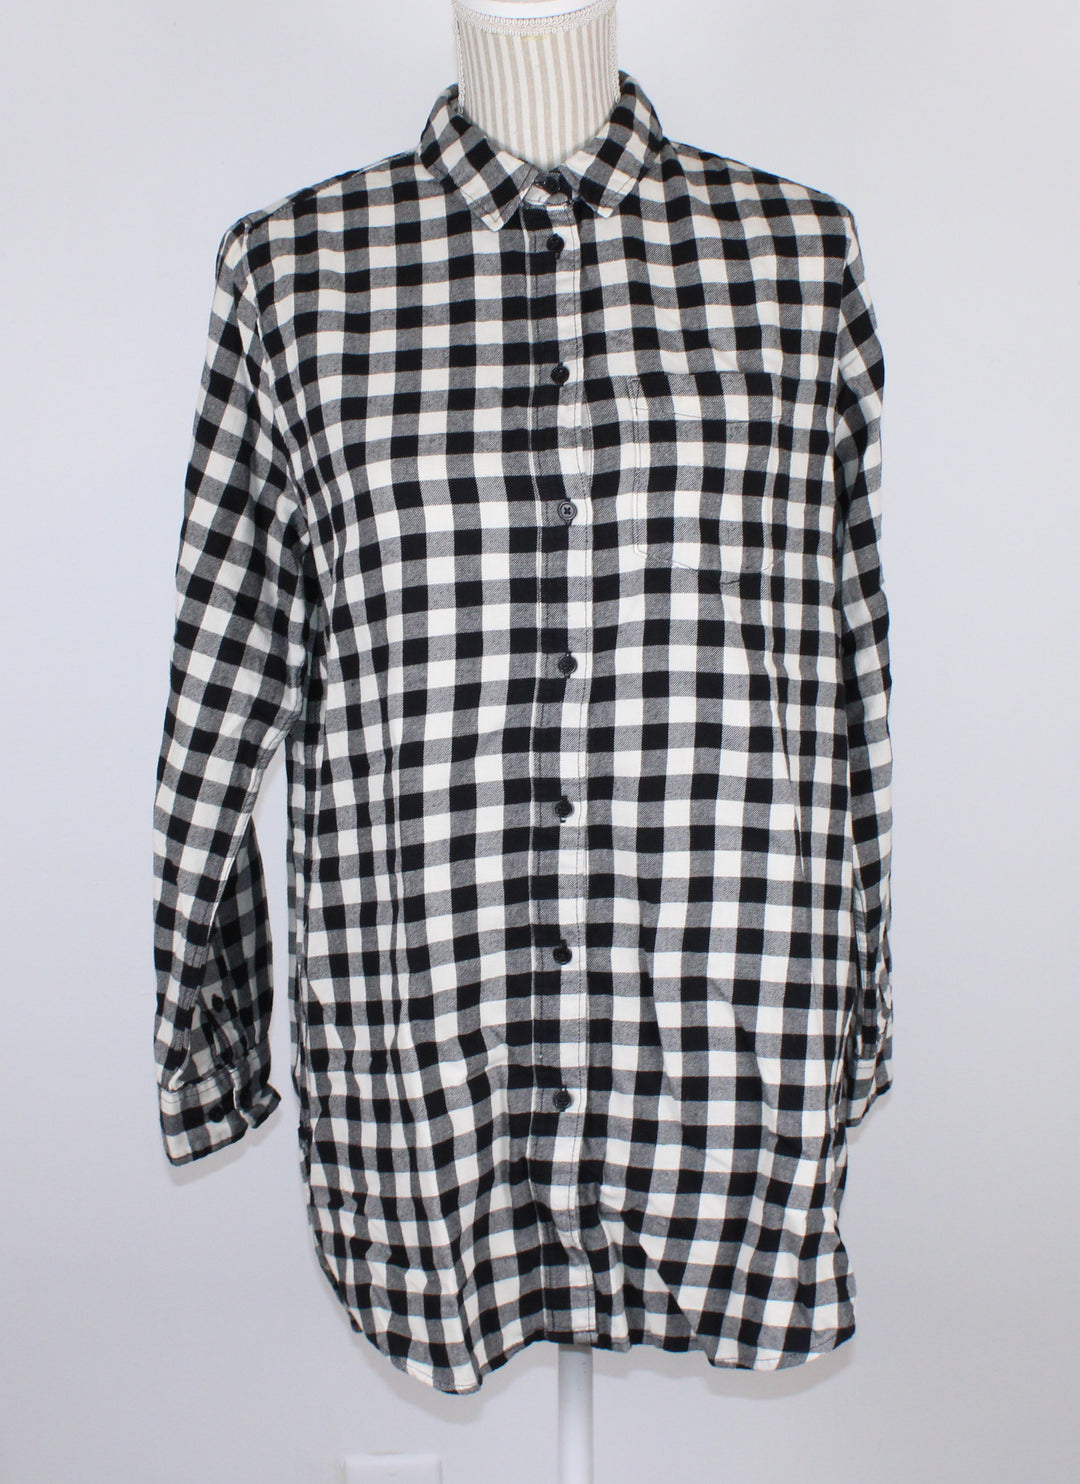 H&M BLACK CHECKERED TOP ADULT SIZE 10 EUC